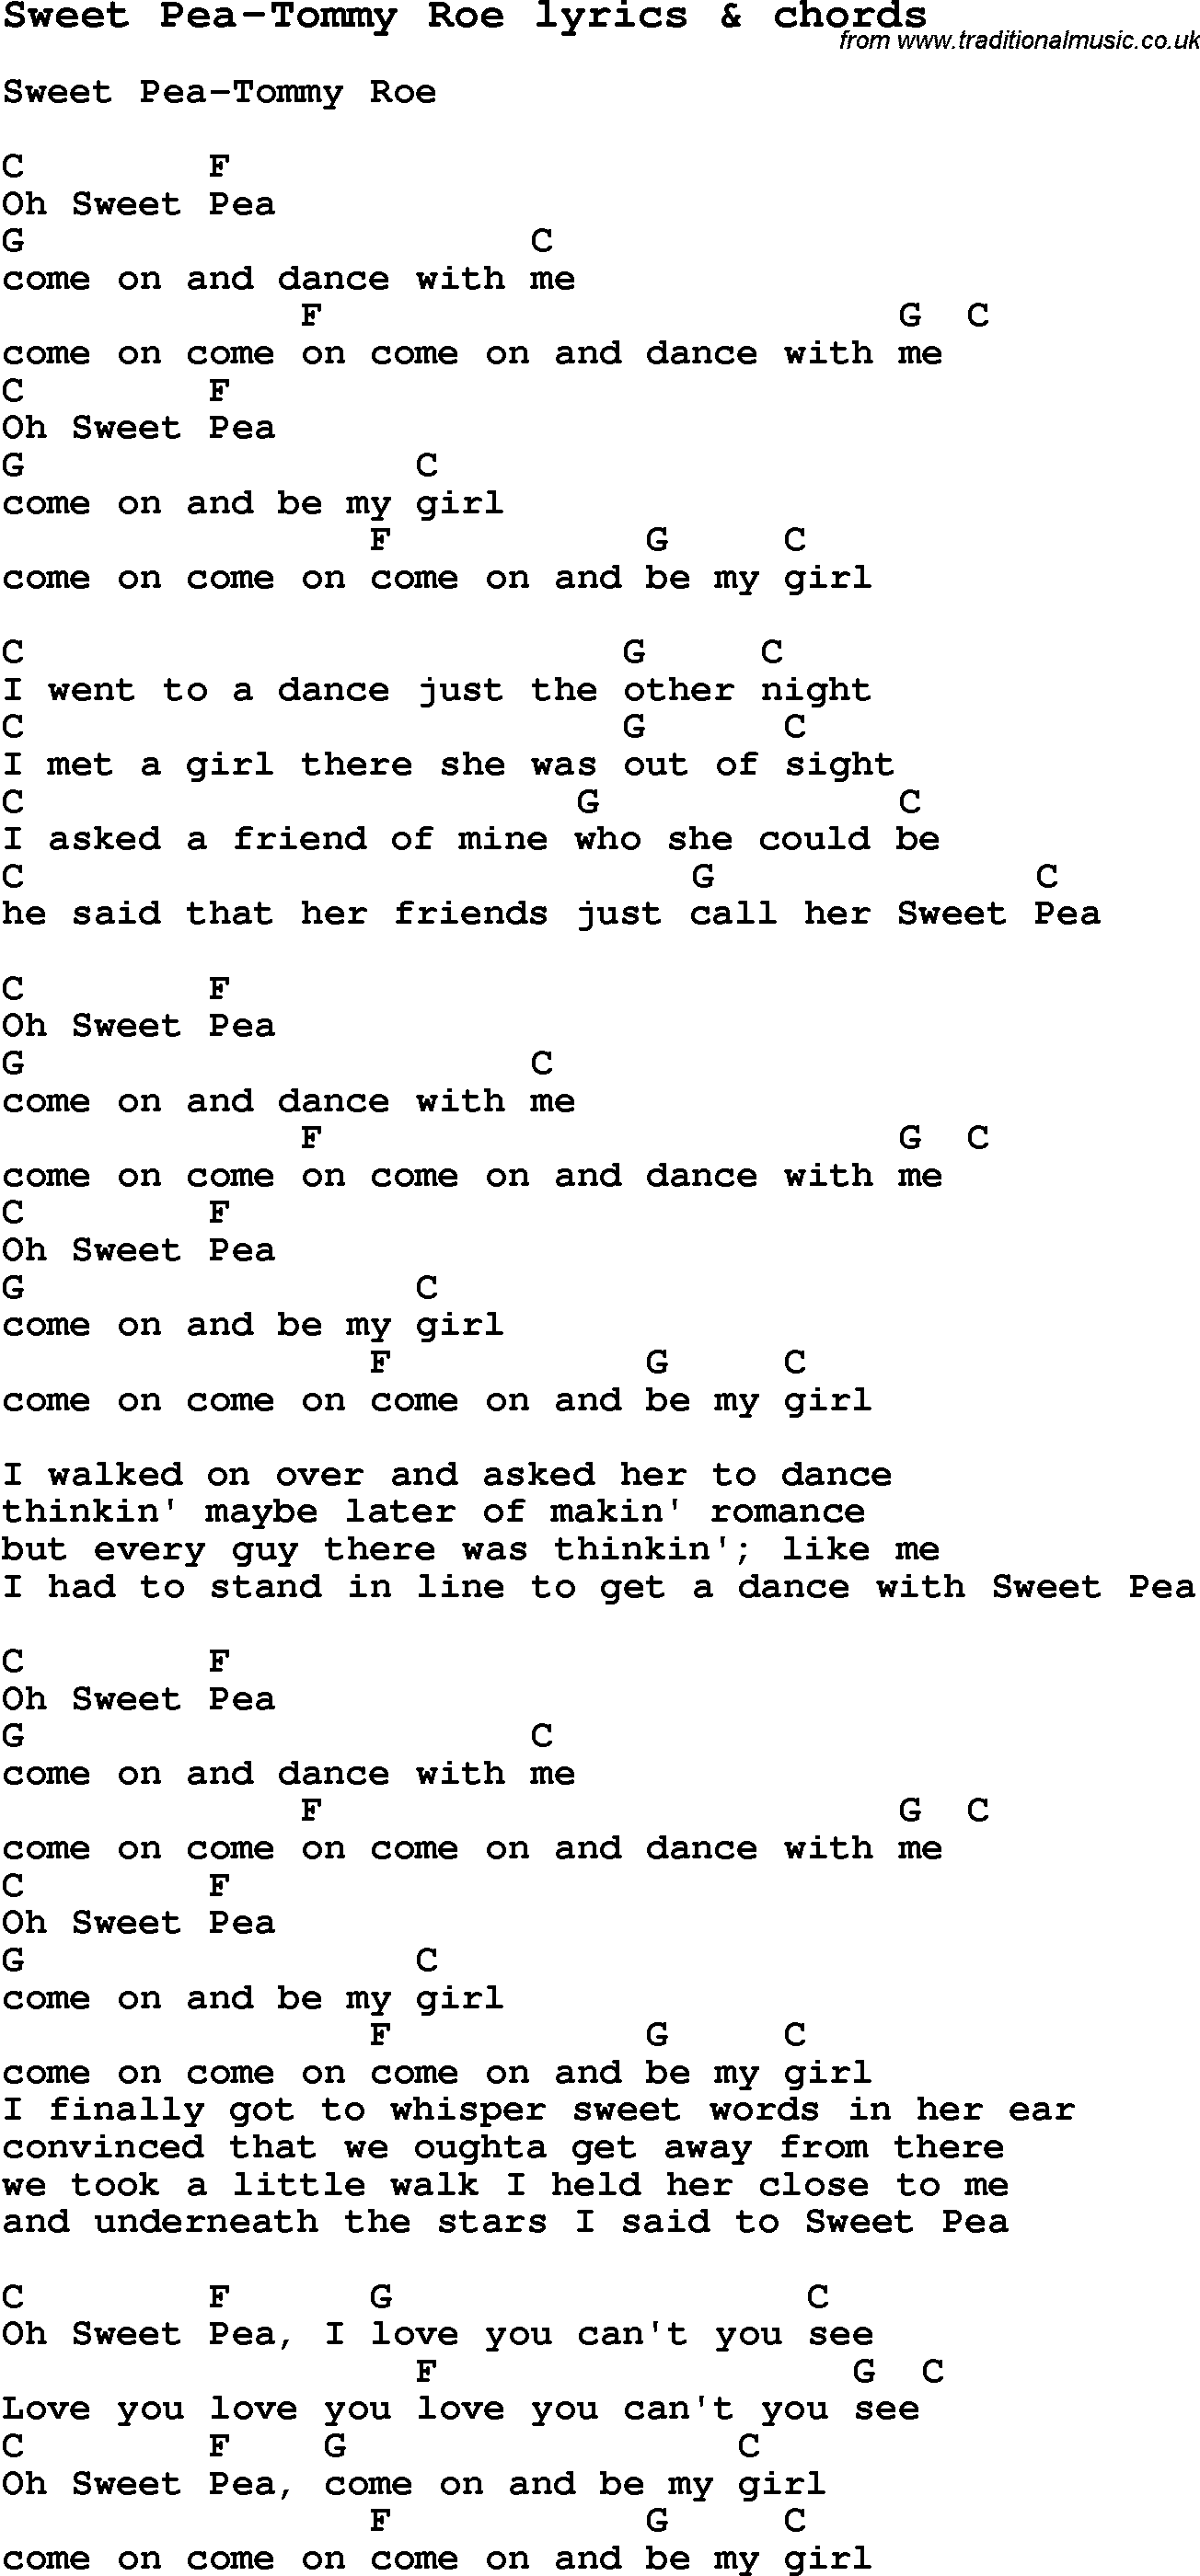 Love Song Lyrics for: Sweet Pea-Tommy Roe with chords for Ukulele, Guitar Banjo etc.